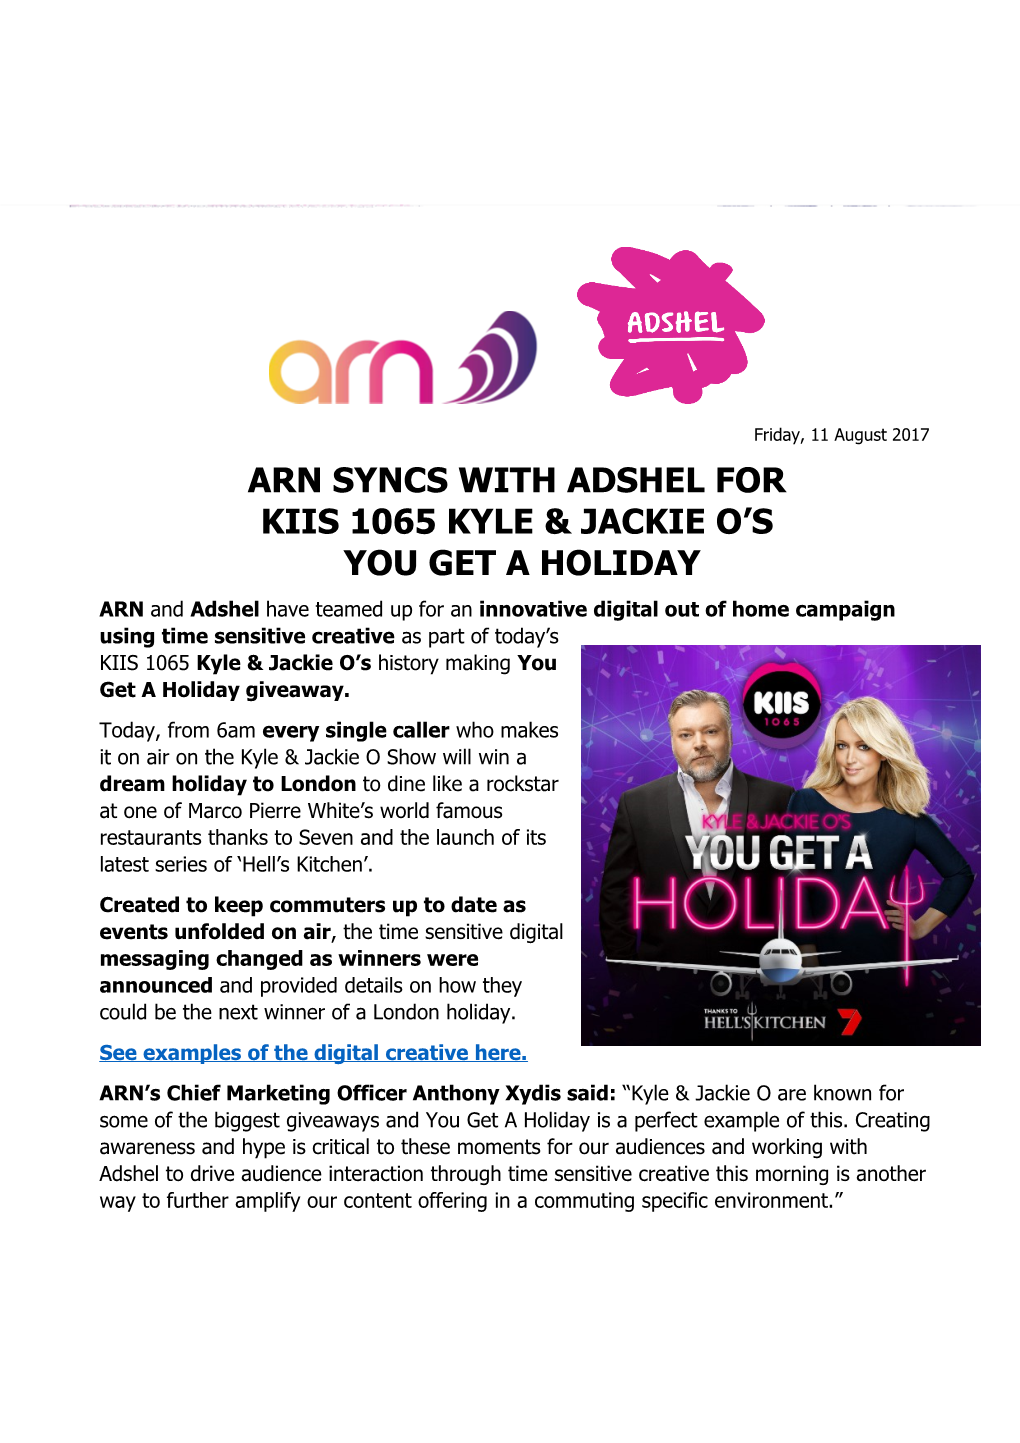 Arn Syncs with Adshel for Kiis 1065 Kyle & Jackie O S You Get a Holiday